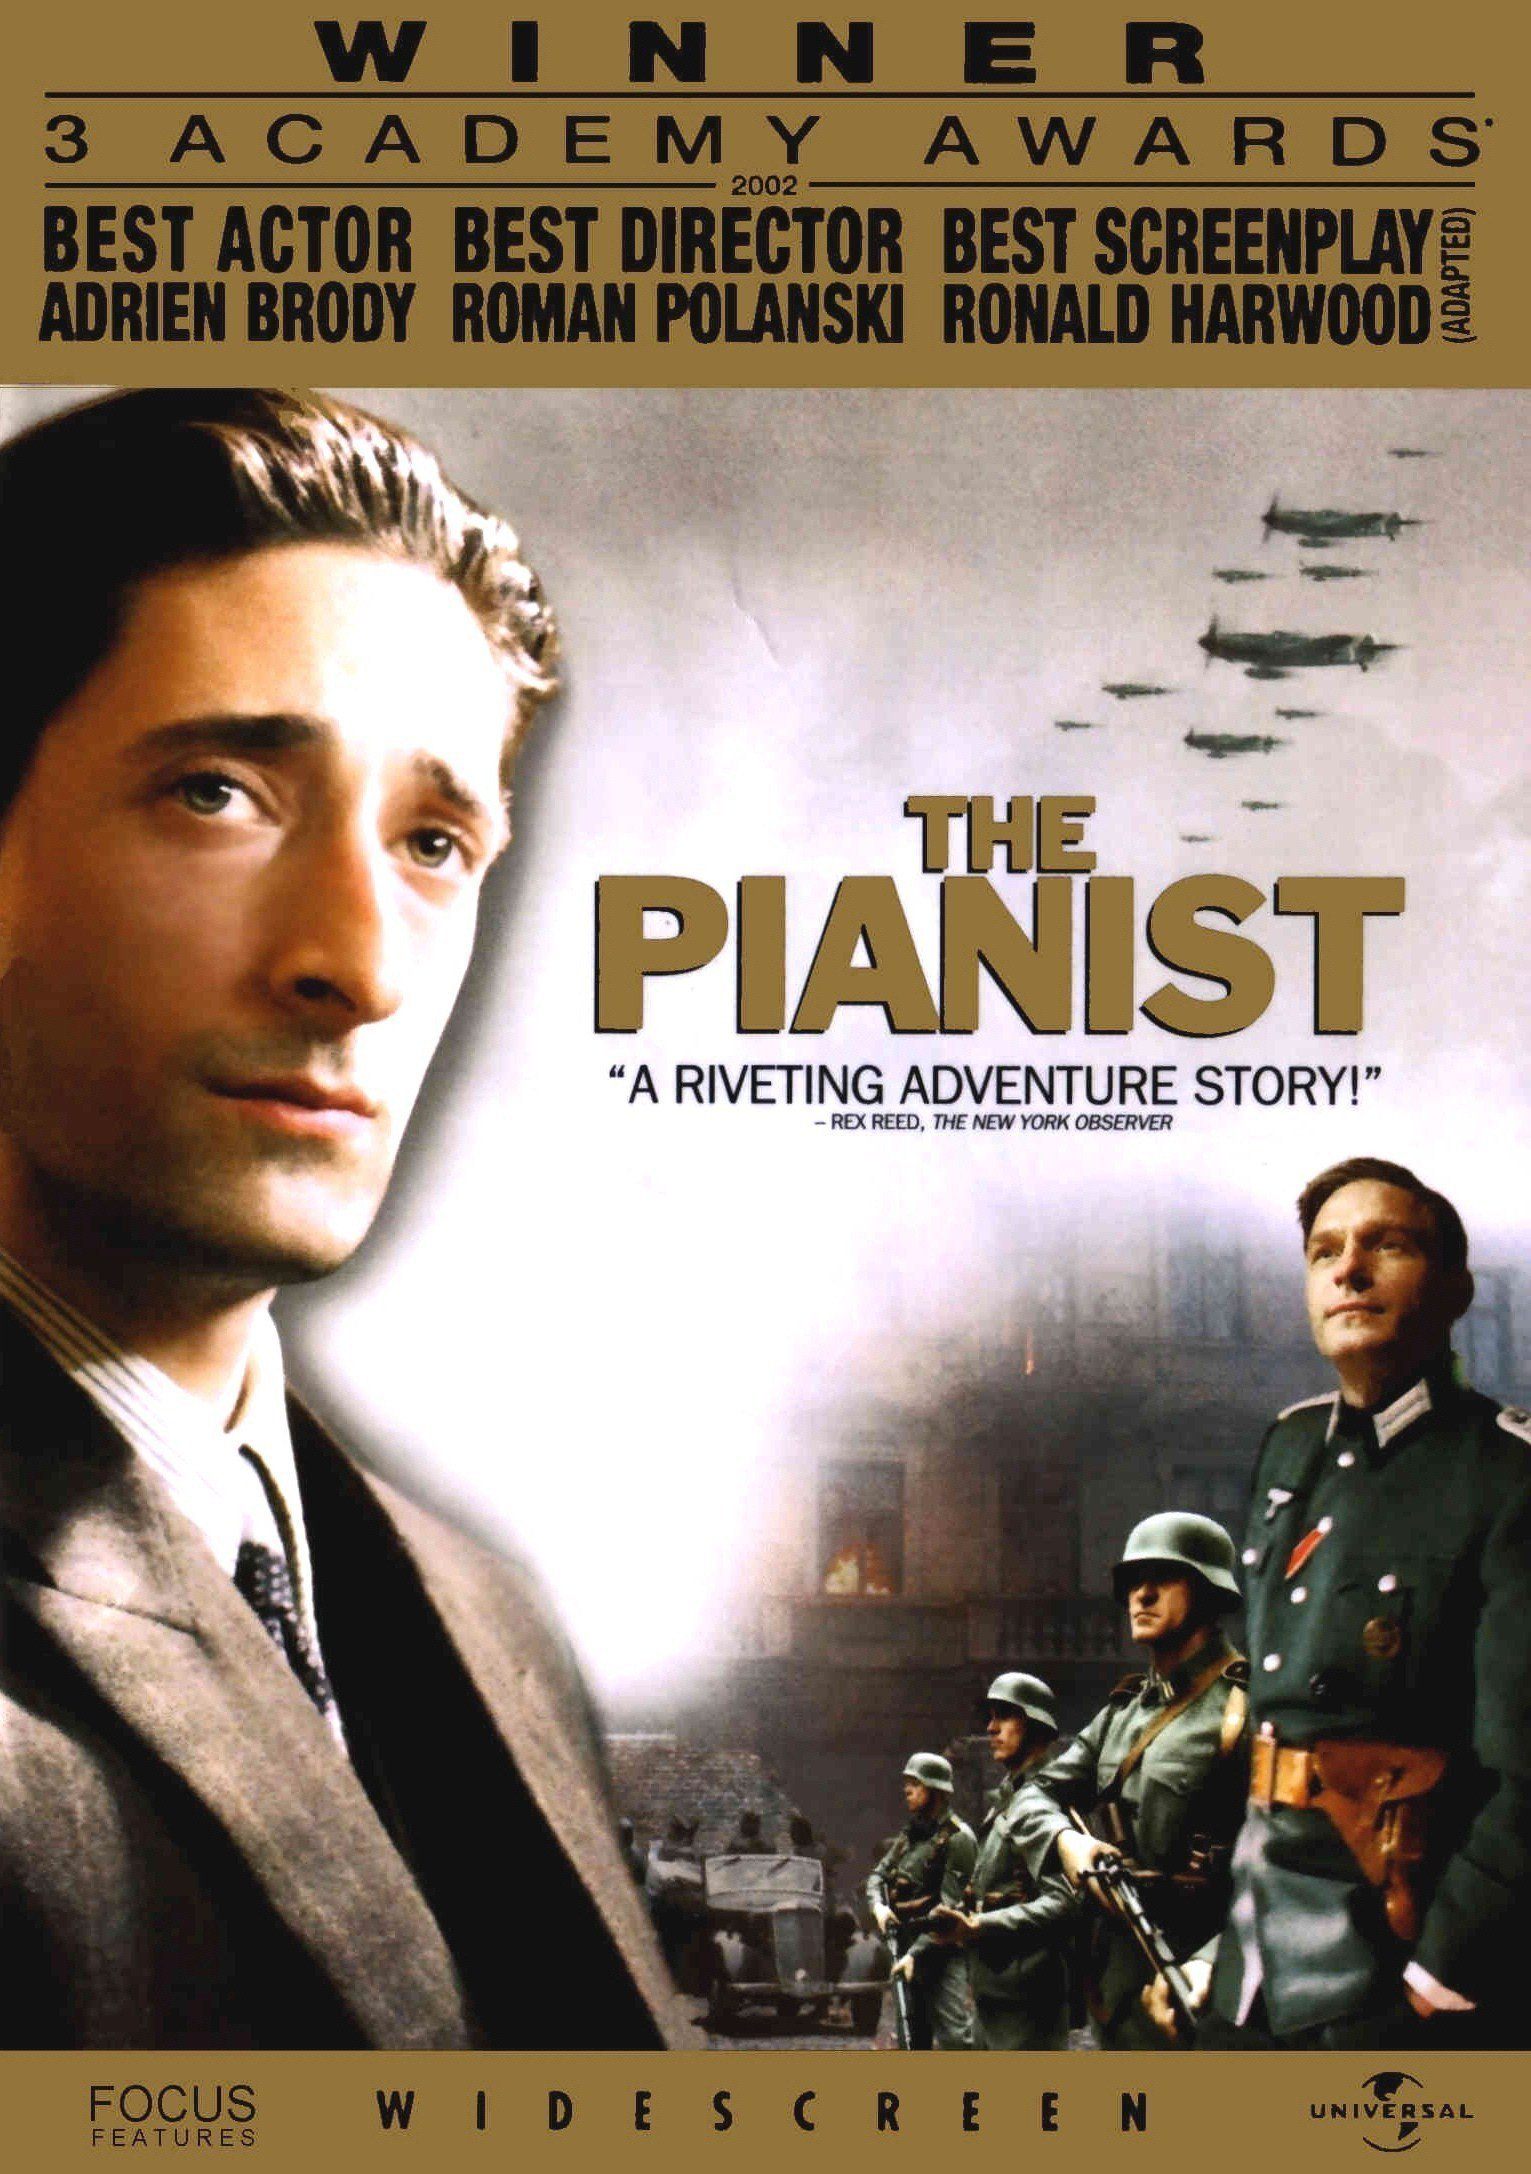 The Pianist - Top Inspirational Movie